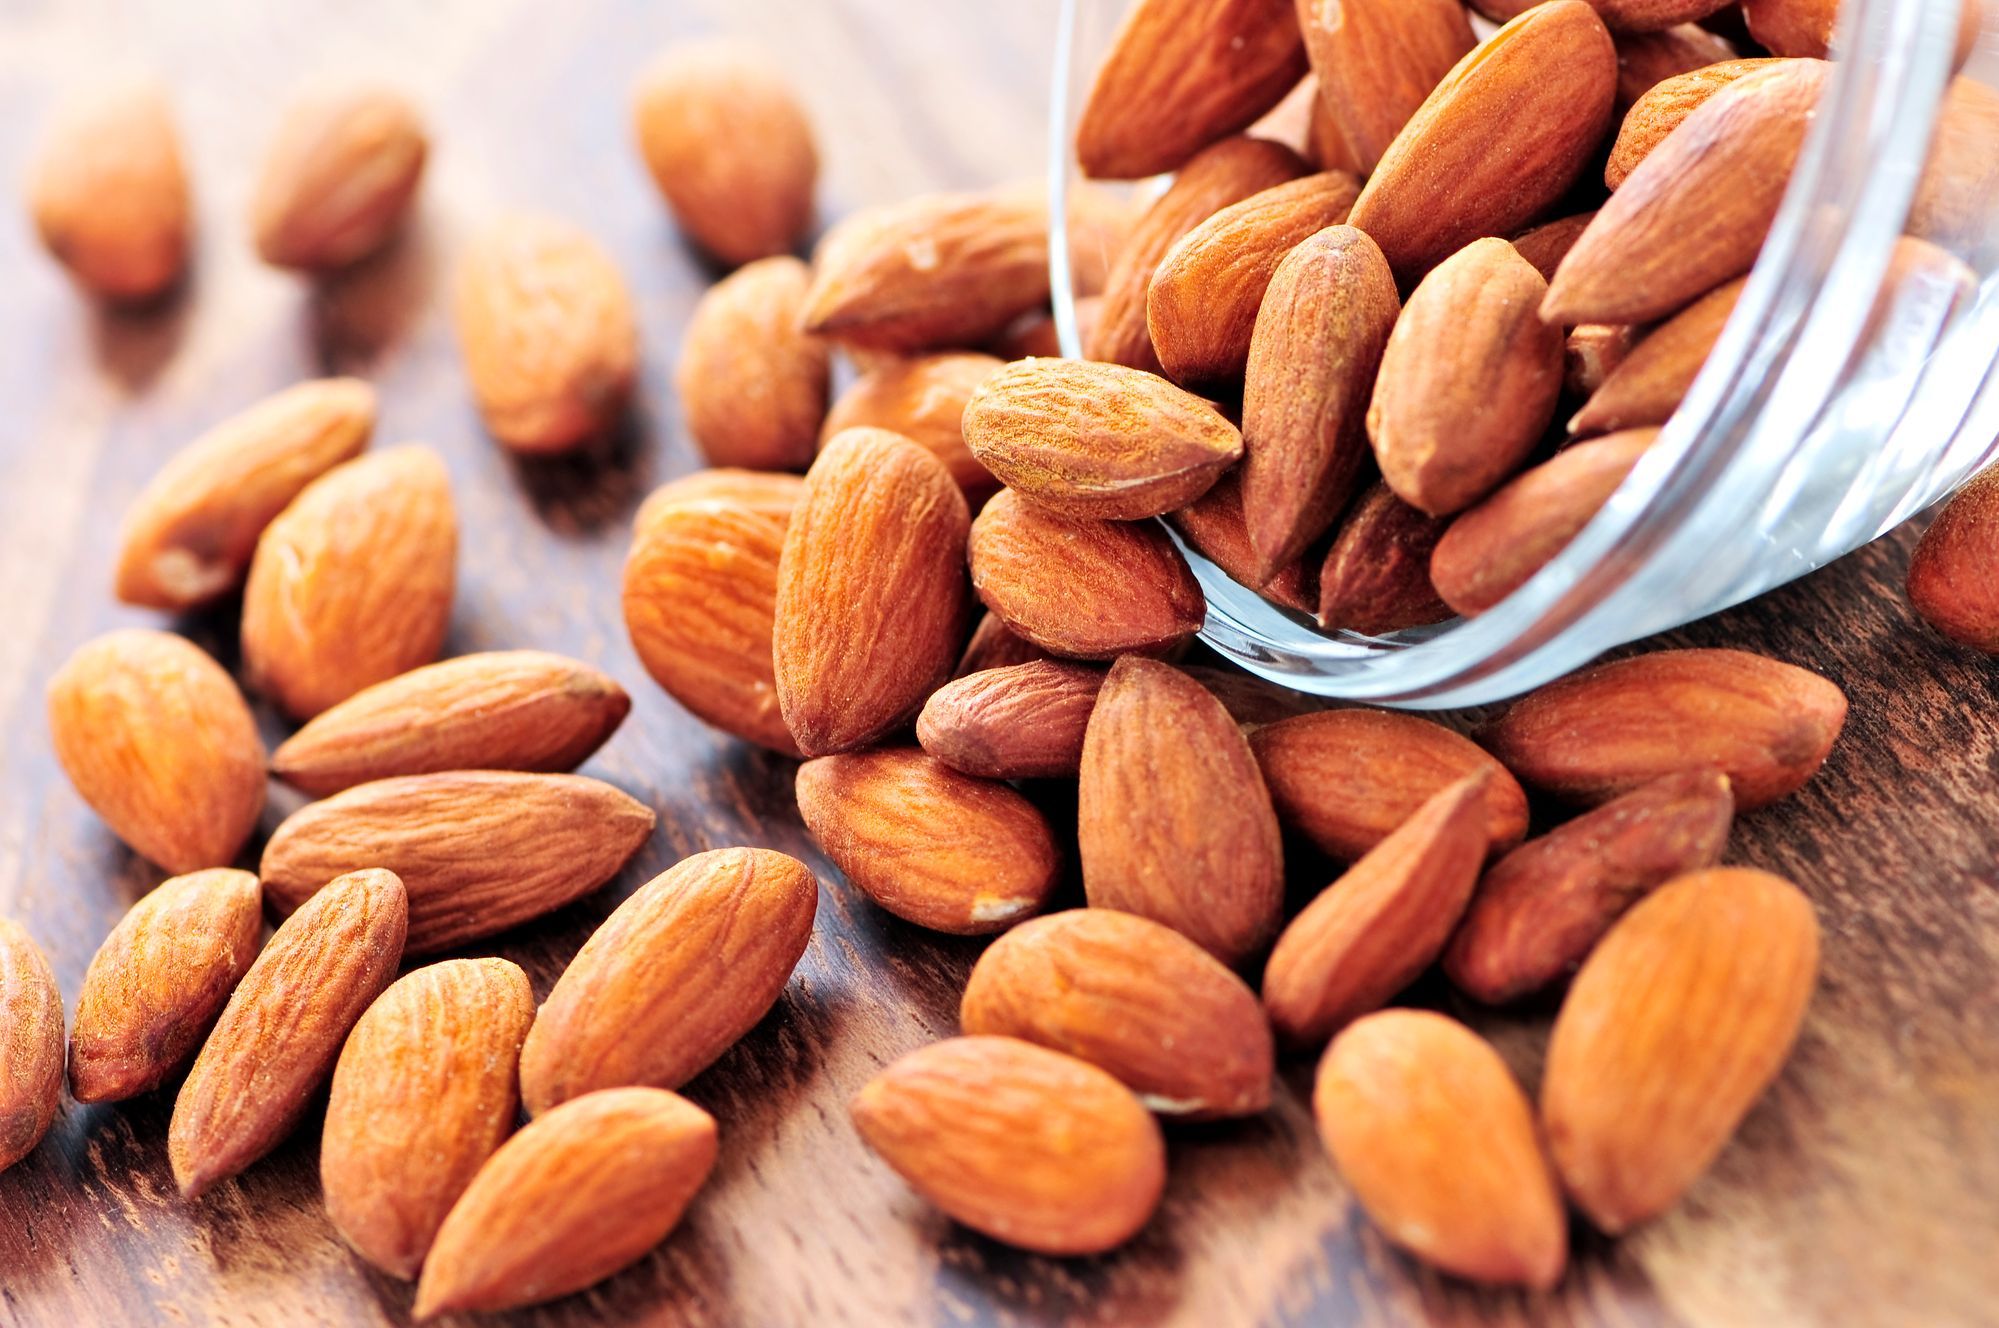 Blue Diamond almonds are allegedly flavored with artificial ingredients